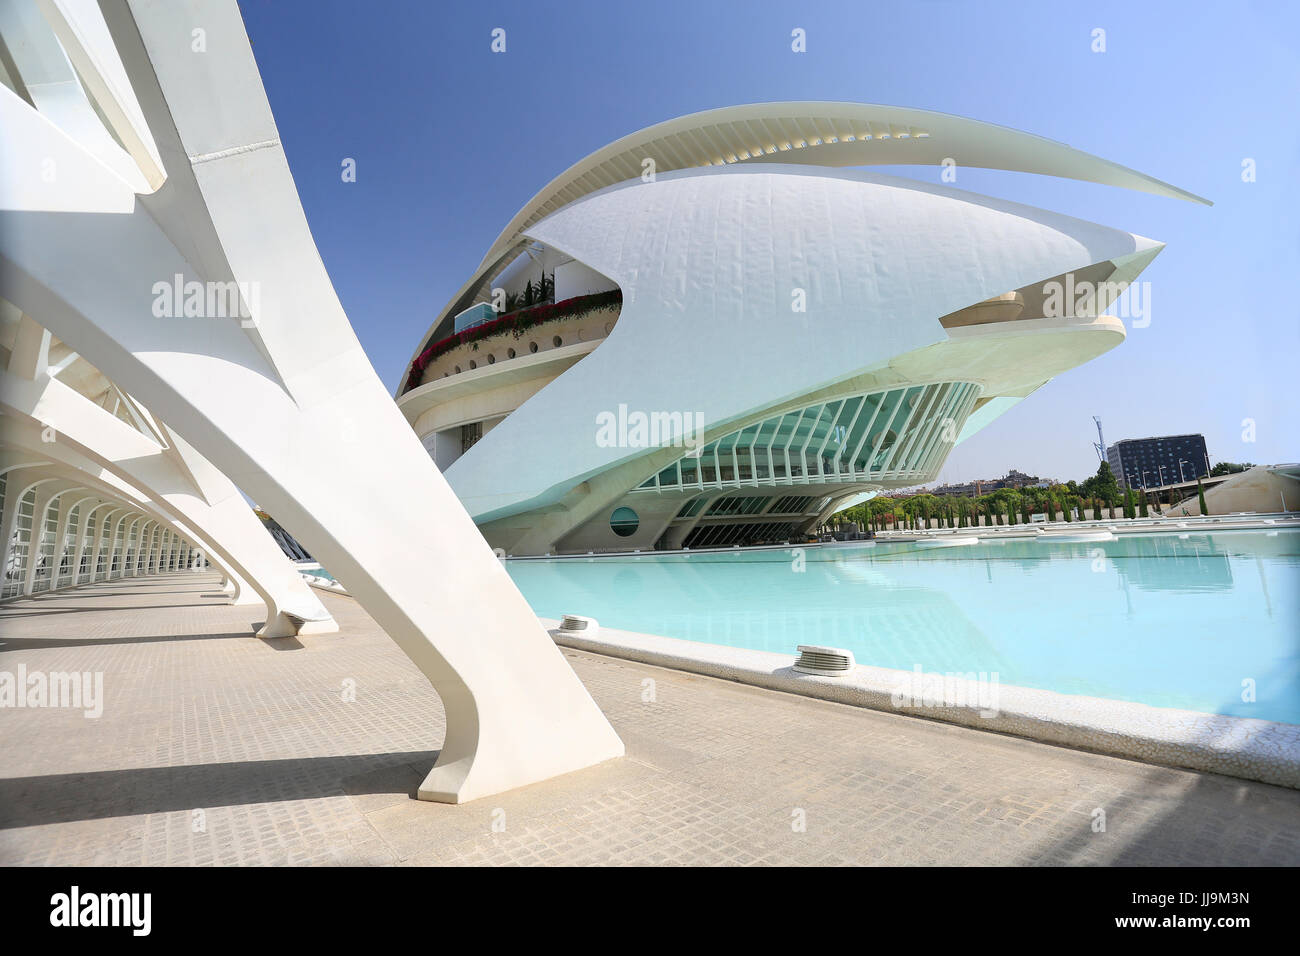 VALENCIA, SPAIN - JULY 24, 2017: The City of Arts and Sciences is an entertainment cultural and architectural complex. Stock Photo